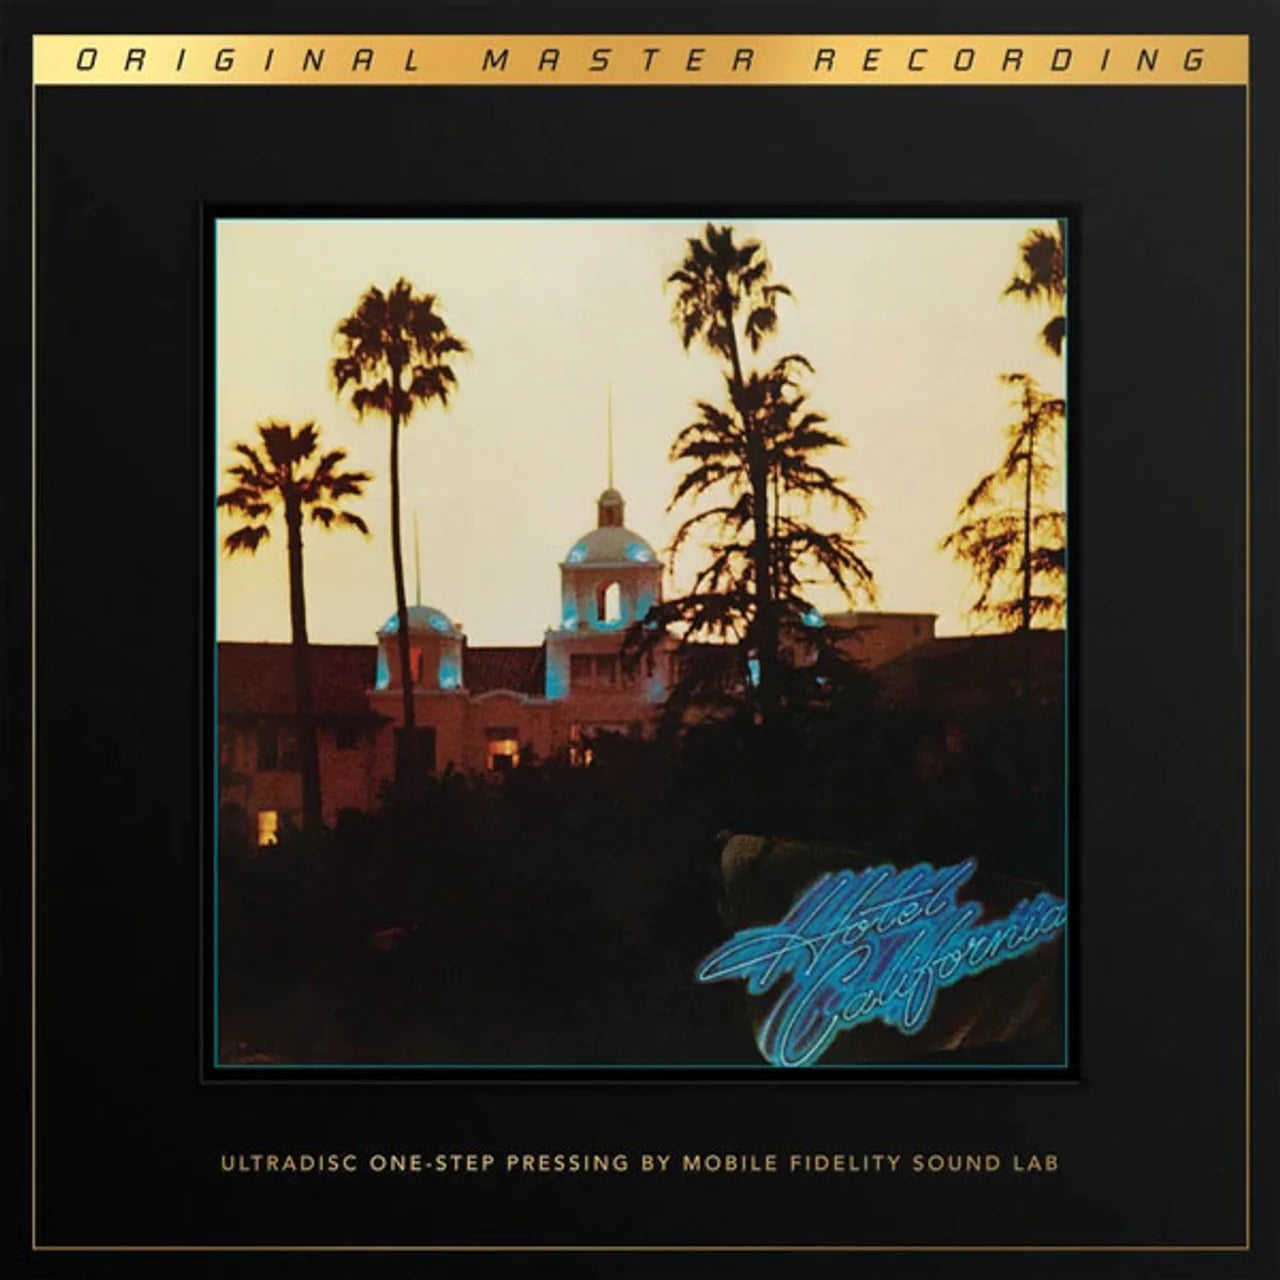 Eagles - Hotel California [Boxset] (180 Gram 45RPM Audiophile SuperVinyl UltraDisc One-Step, limited/numbered to 17,500)